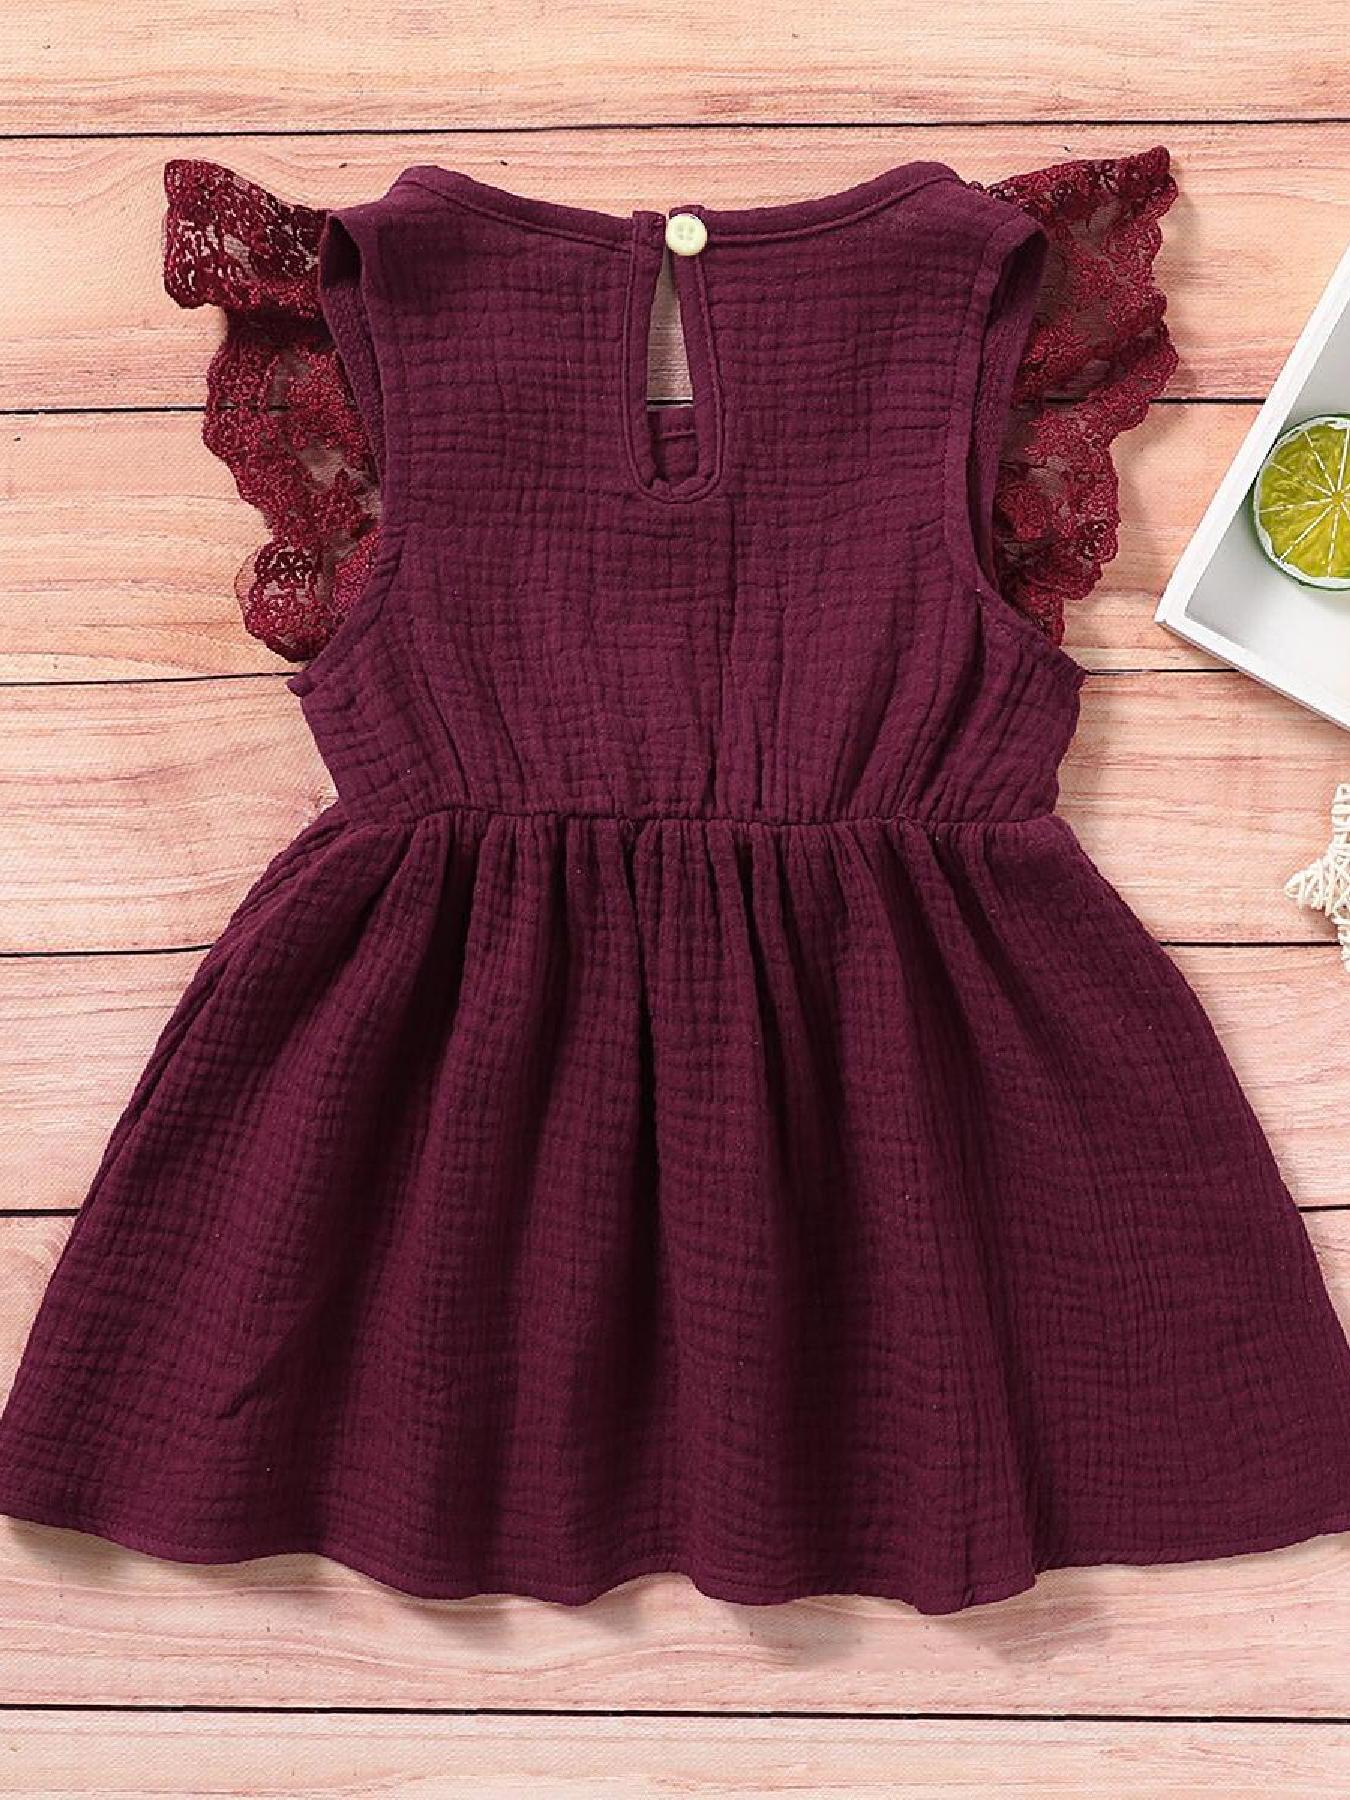 Silkberry Baby Girl Lace Dress - Sleeveless Bowknot Summer Gown With  Headband